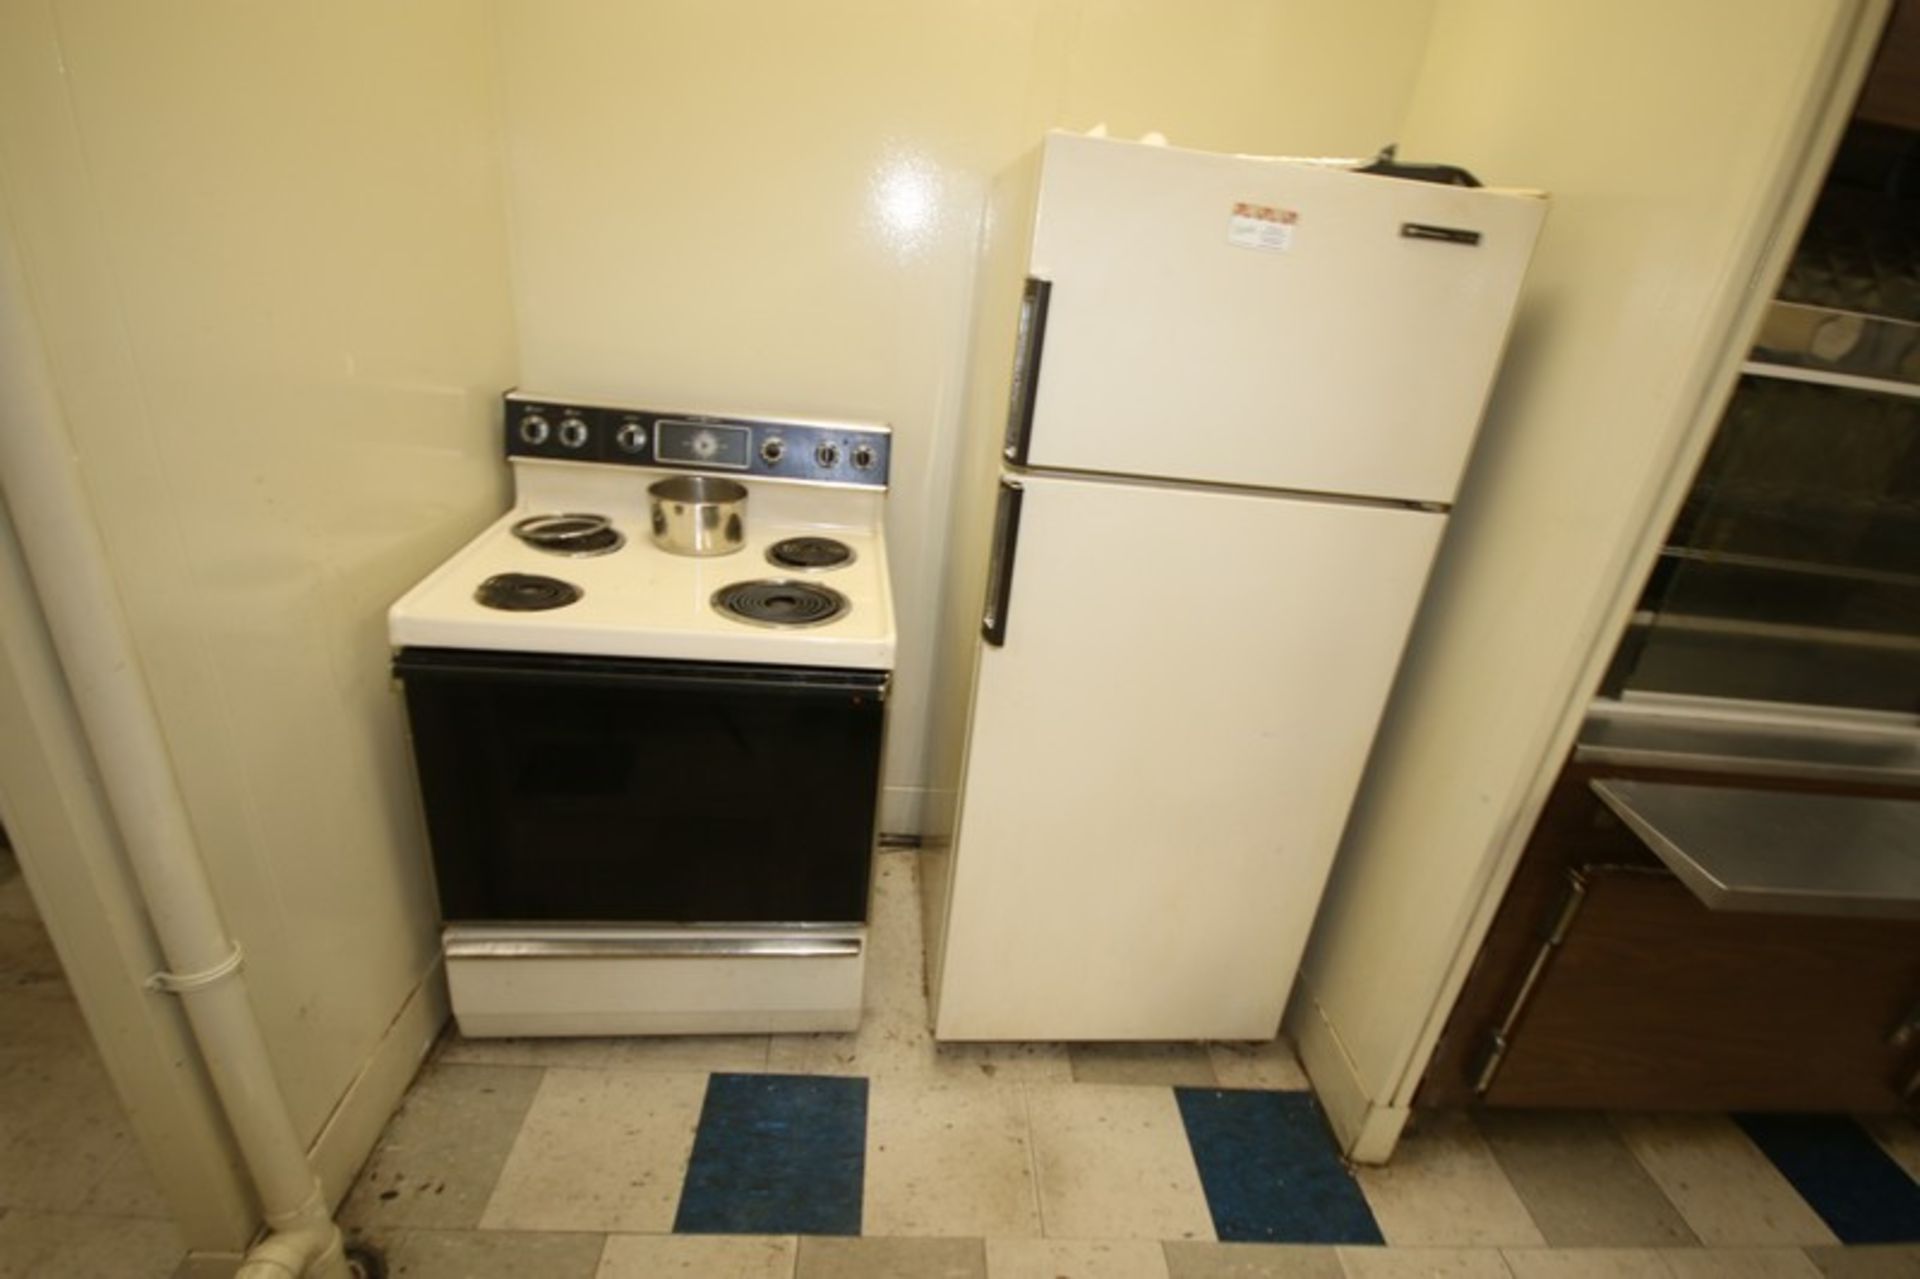 Contents of Break Room, Includes (2) Soda Dispensing Machines, 2-Shelf S/S Warming Station, - Image 6 of 7